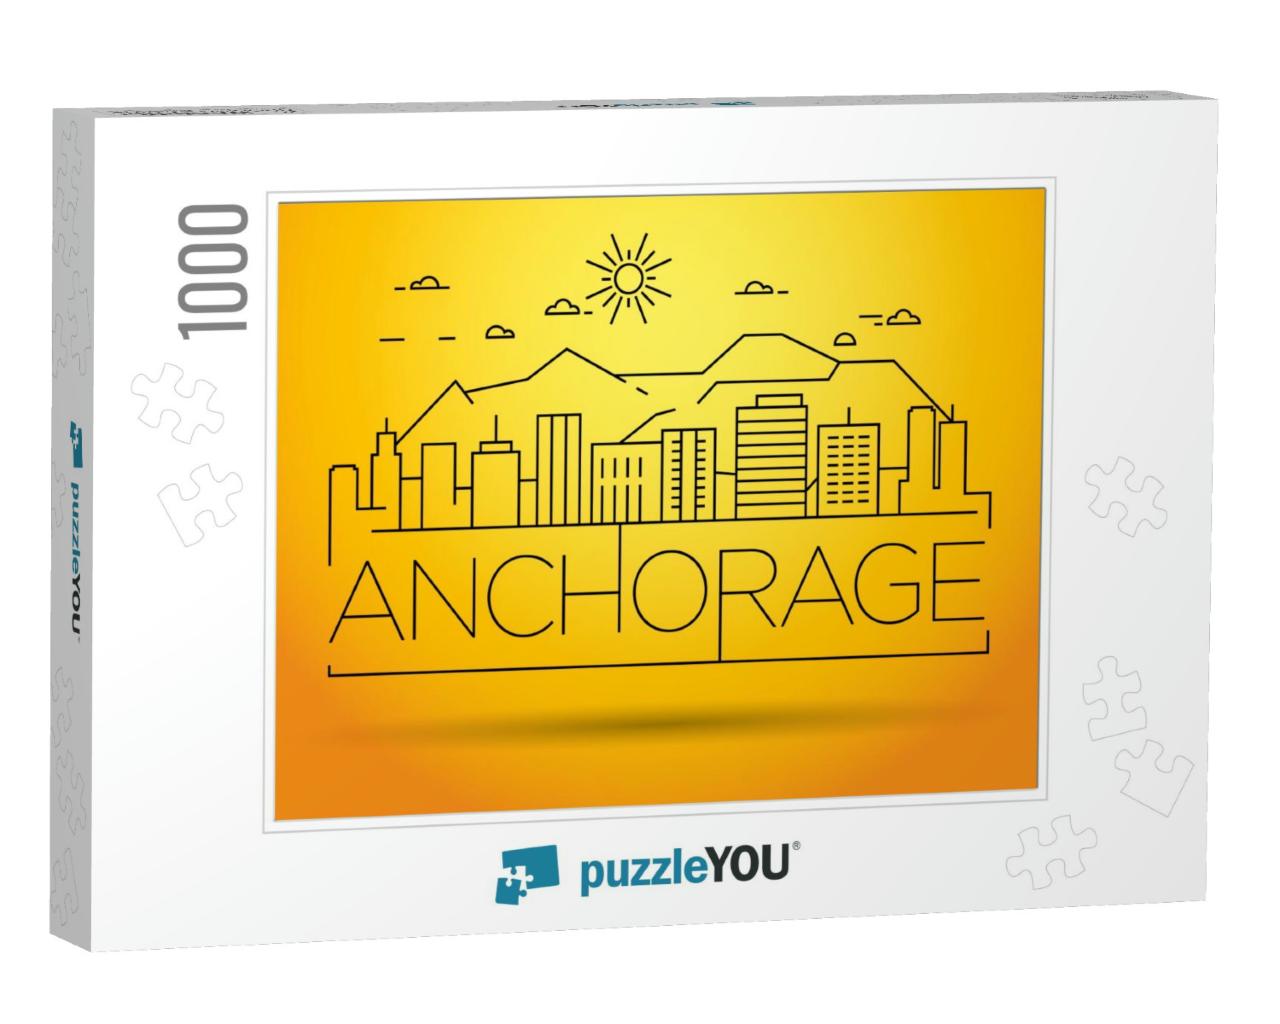 Minimal Anchorage Linear City Skyline with Typographic De... Jigsaw Puzzle with 1000 pieces